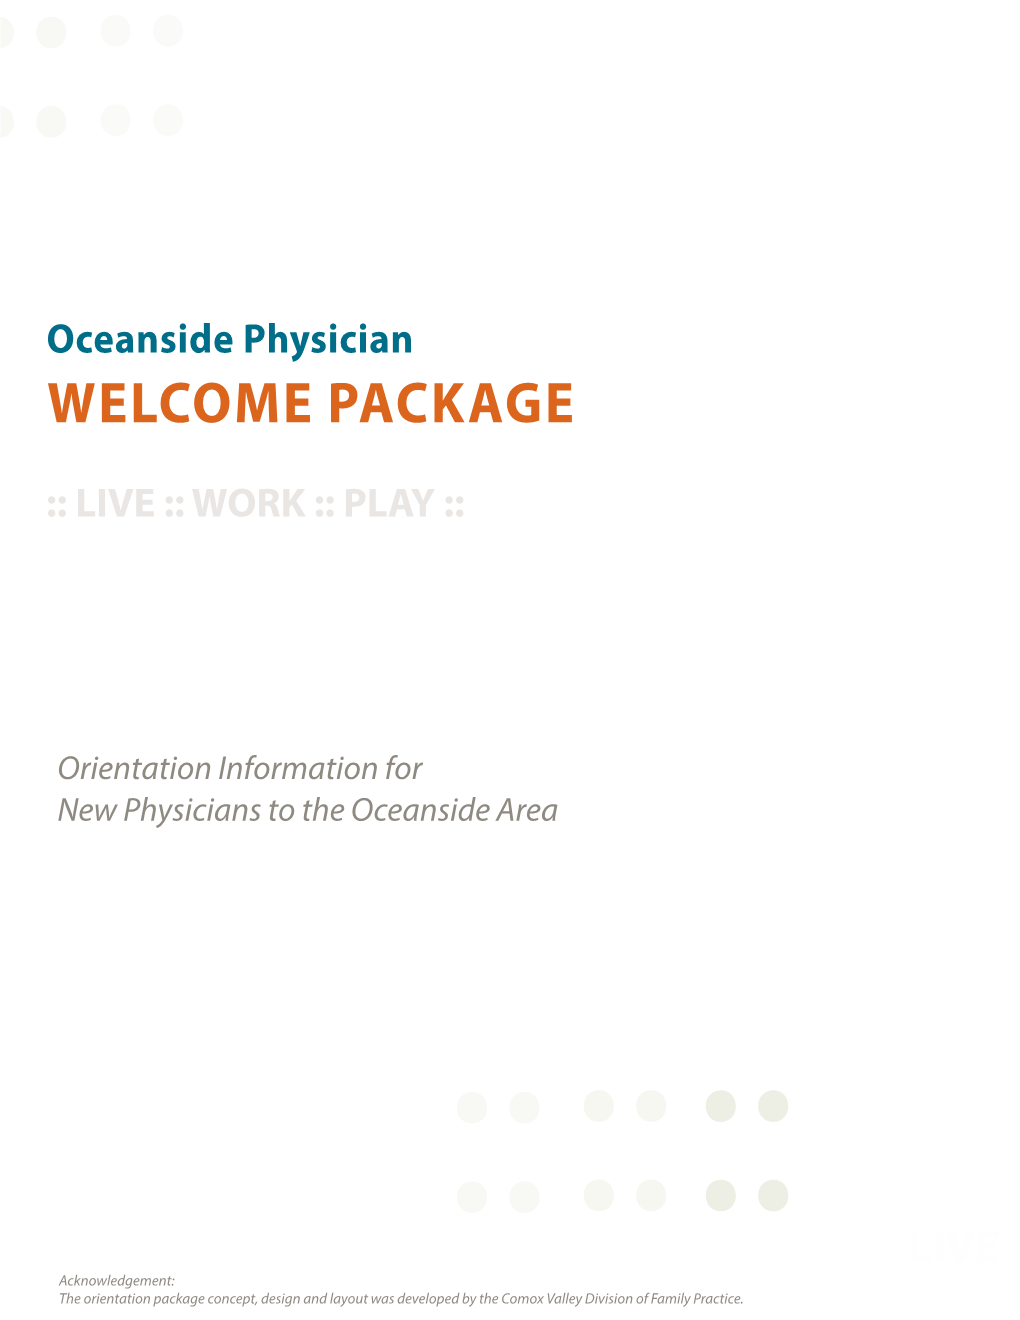 Oceanside Physician WELCOME PACKAGE